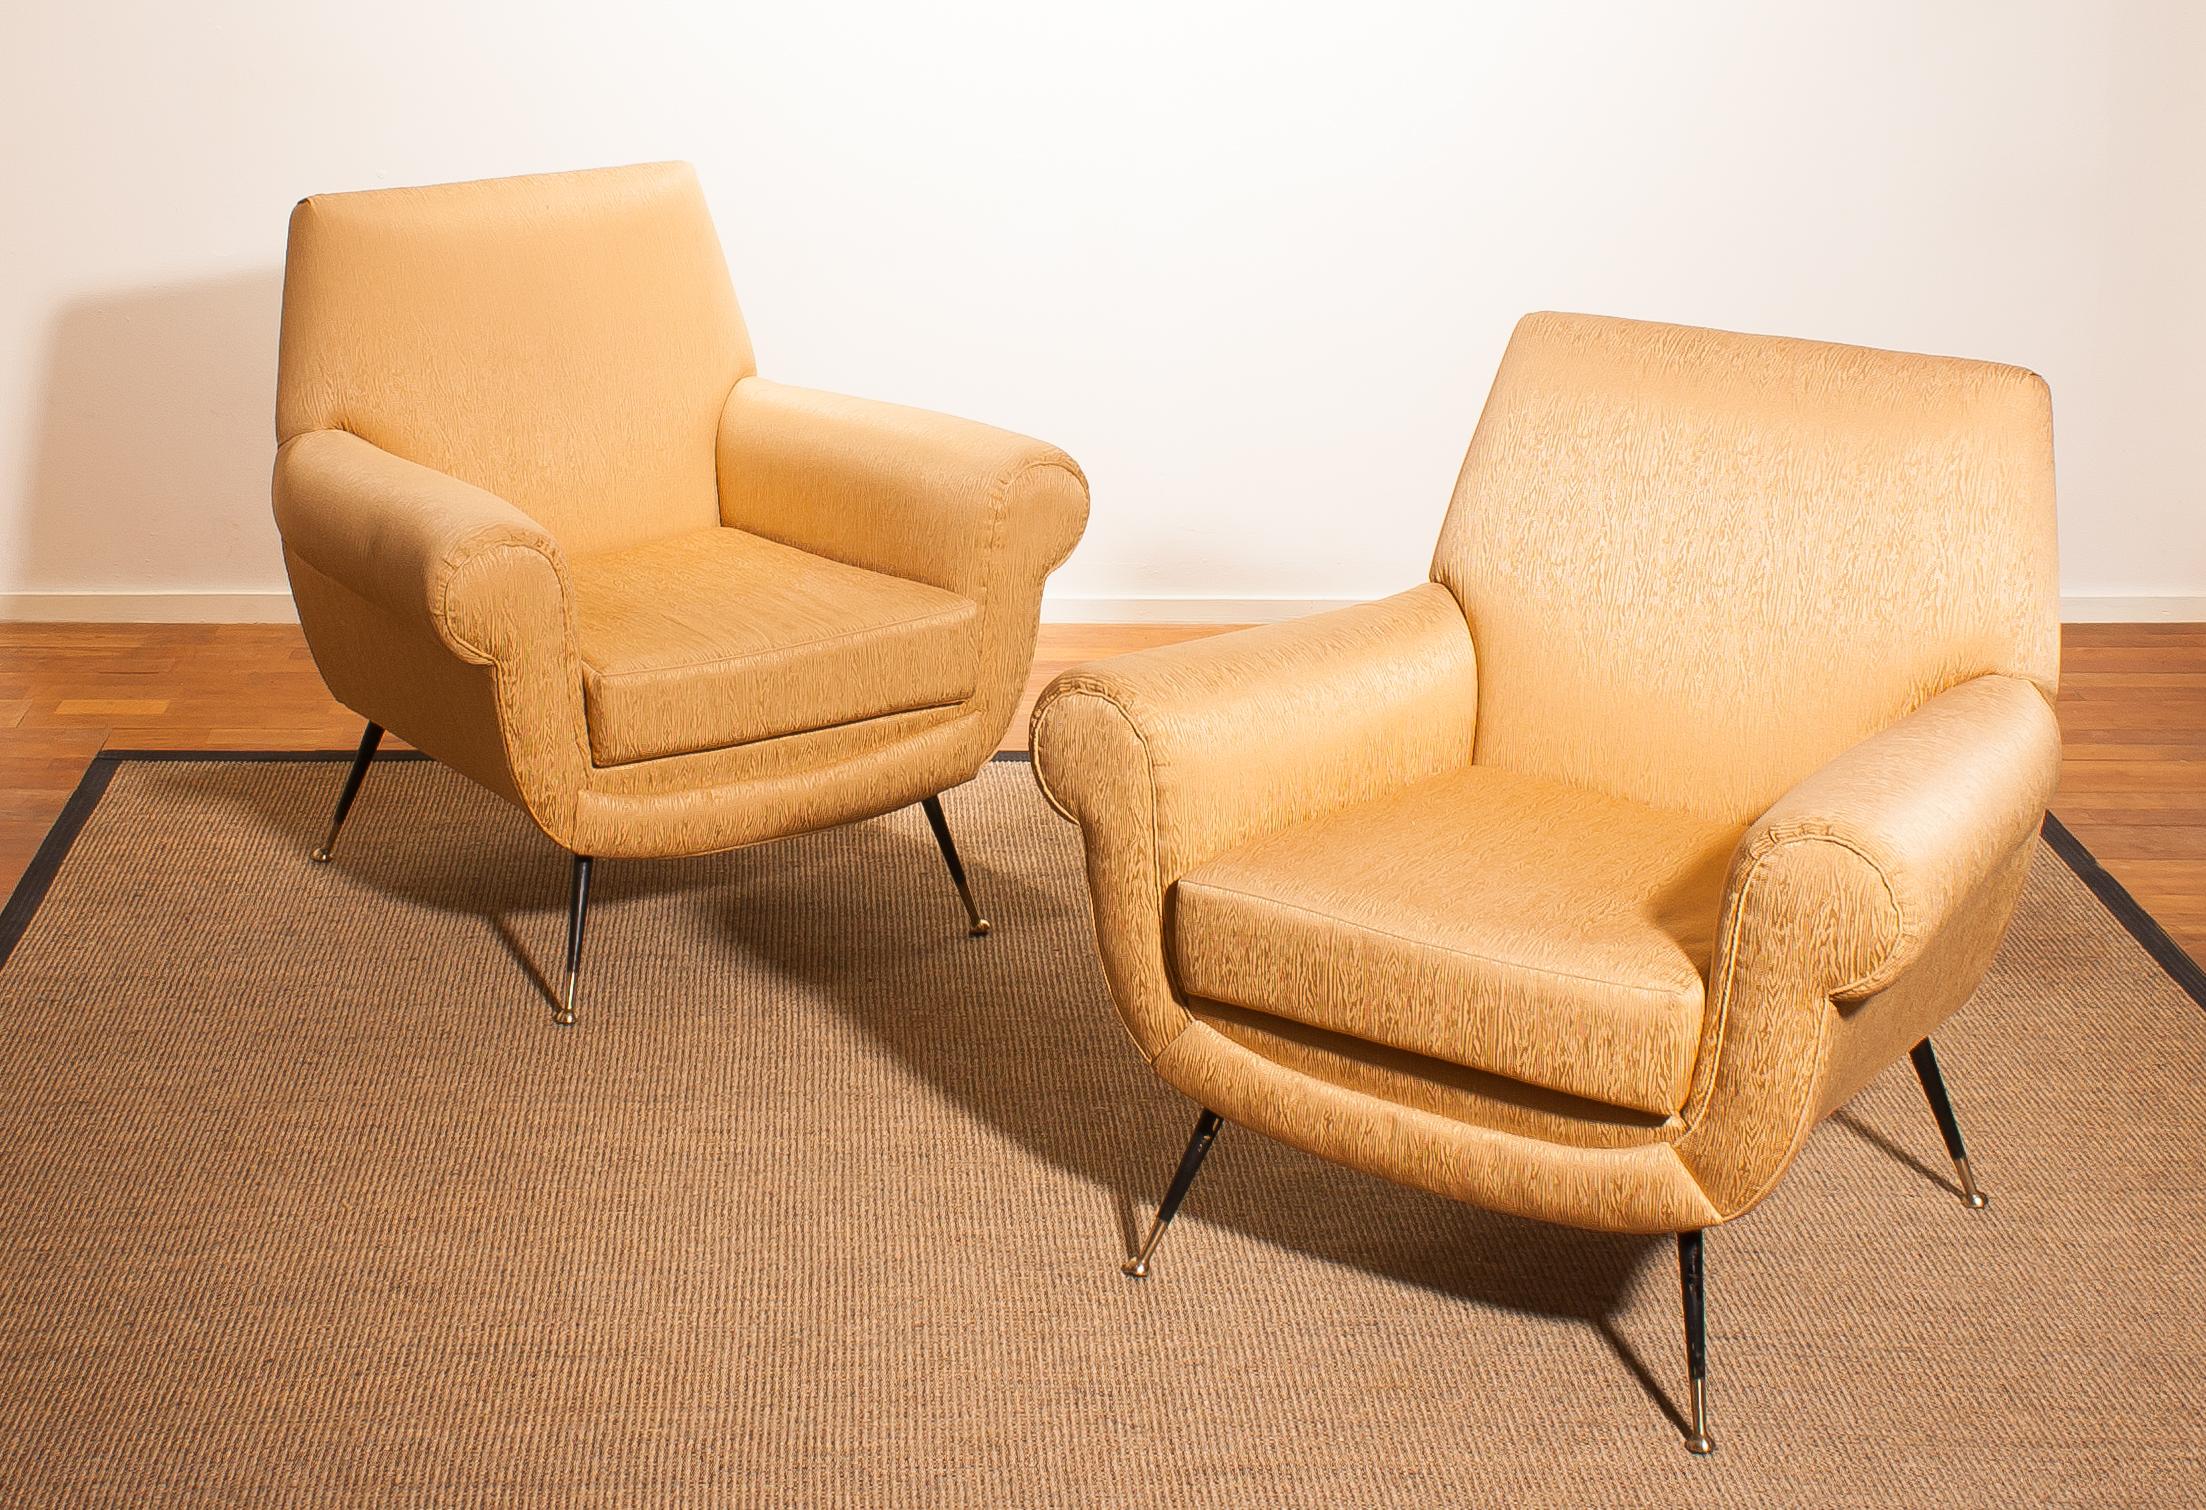 1950s, Brass and Golden Jacquard Set Lounge Chairs by Gigi Radice for Minotti 2